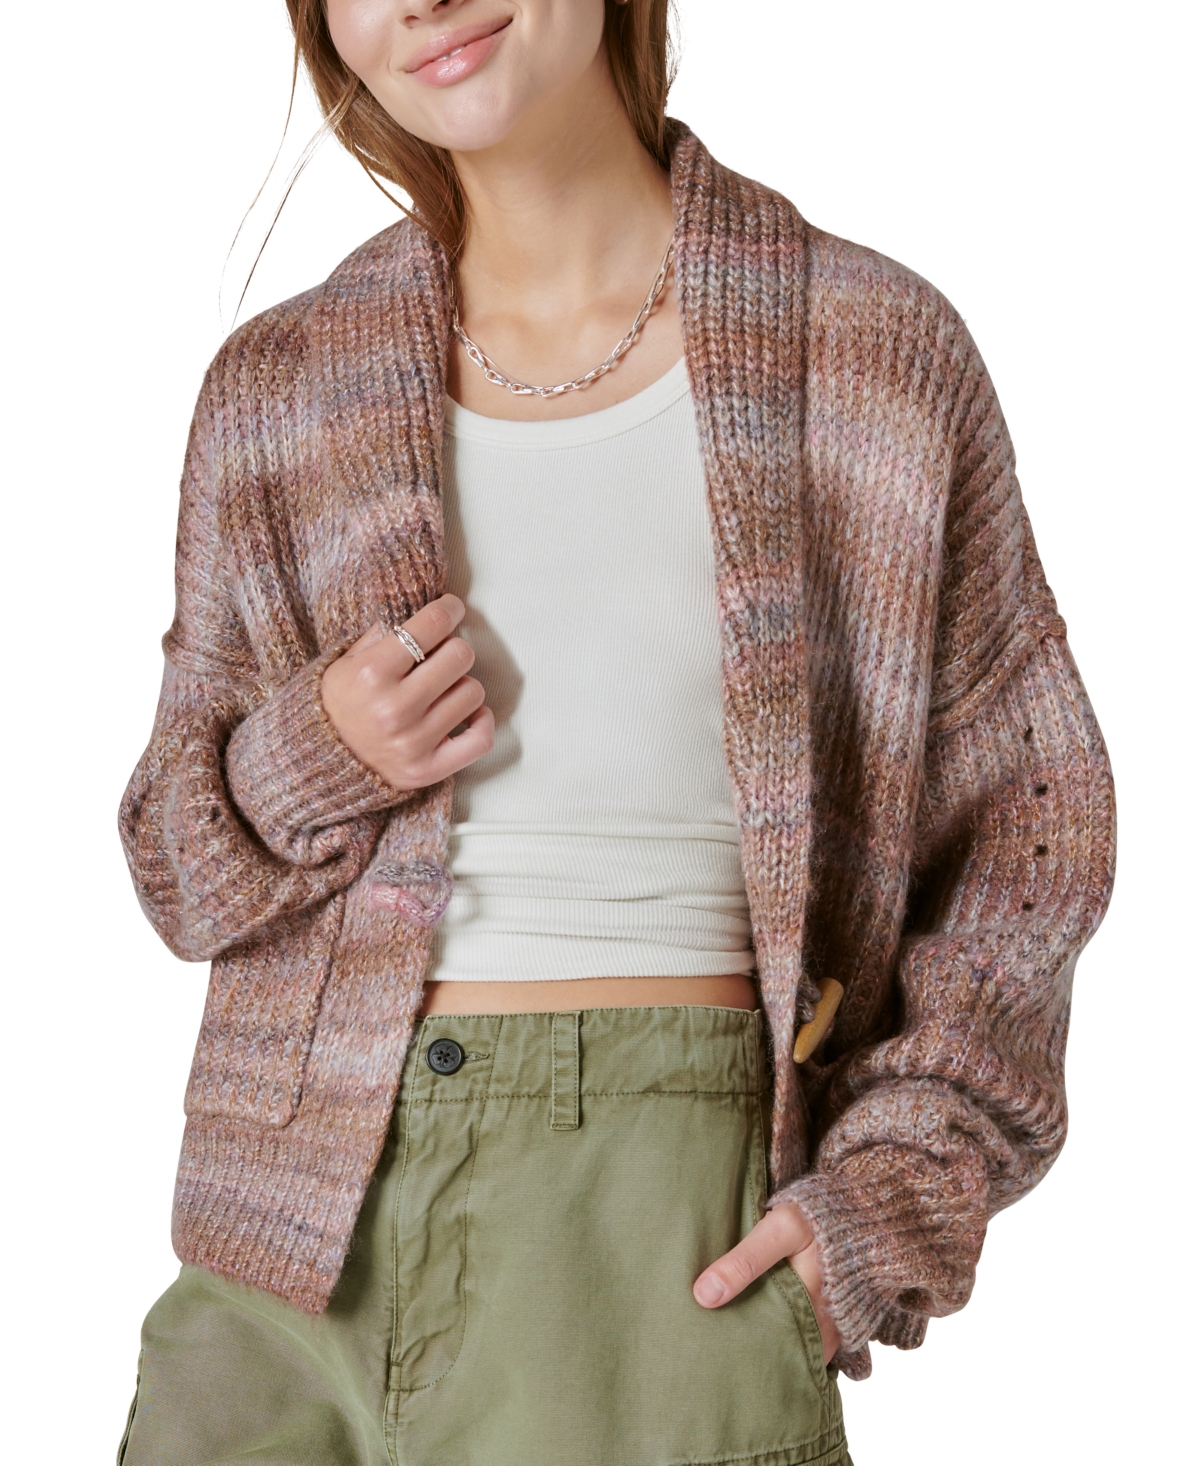 Women's Striped Toggle-Front Cardigan - Taupe Multi